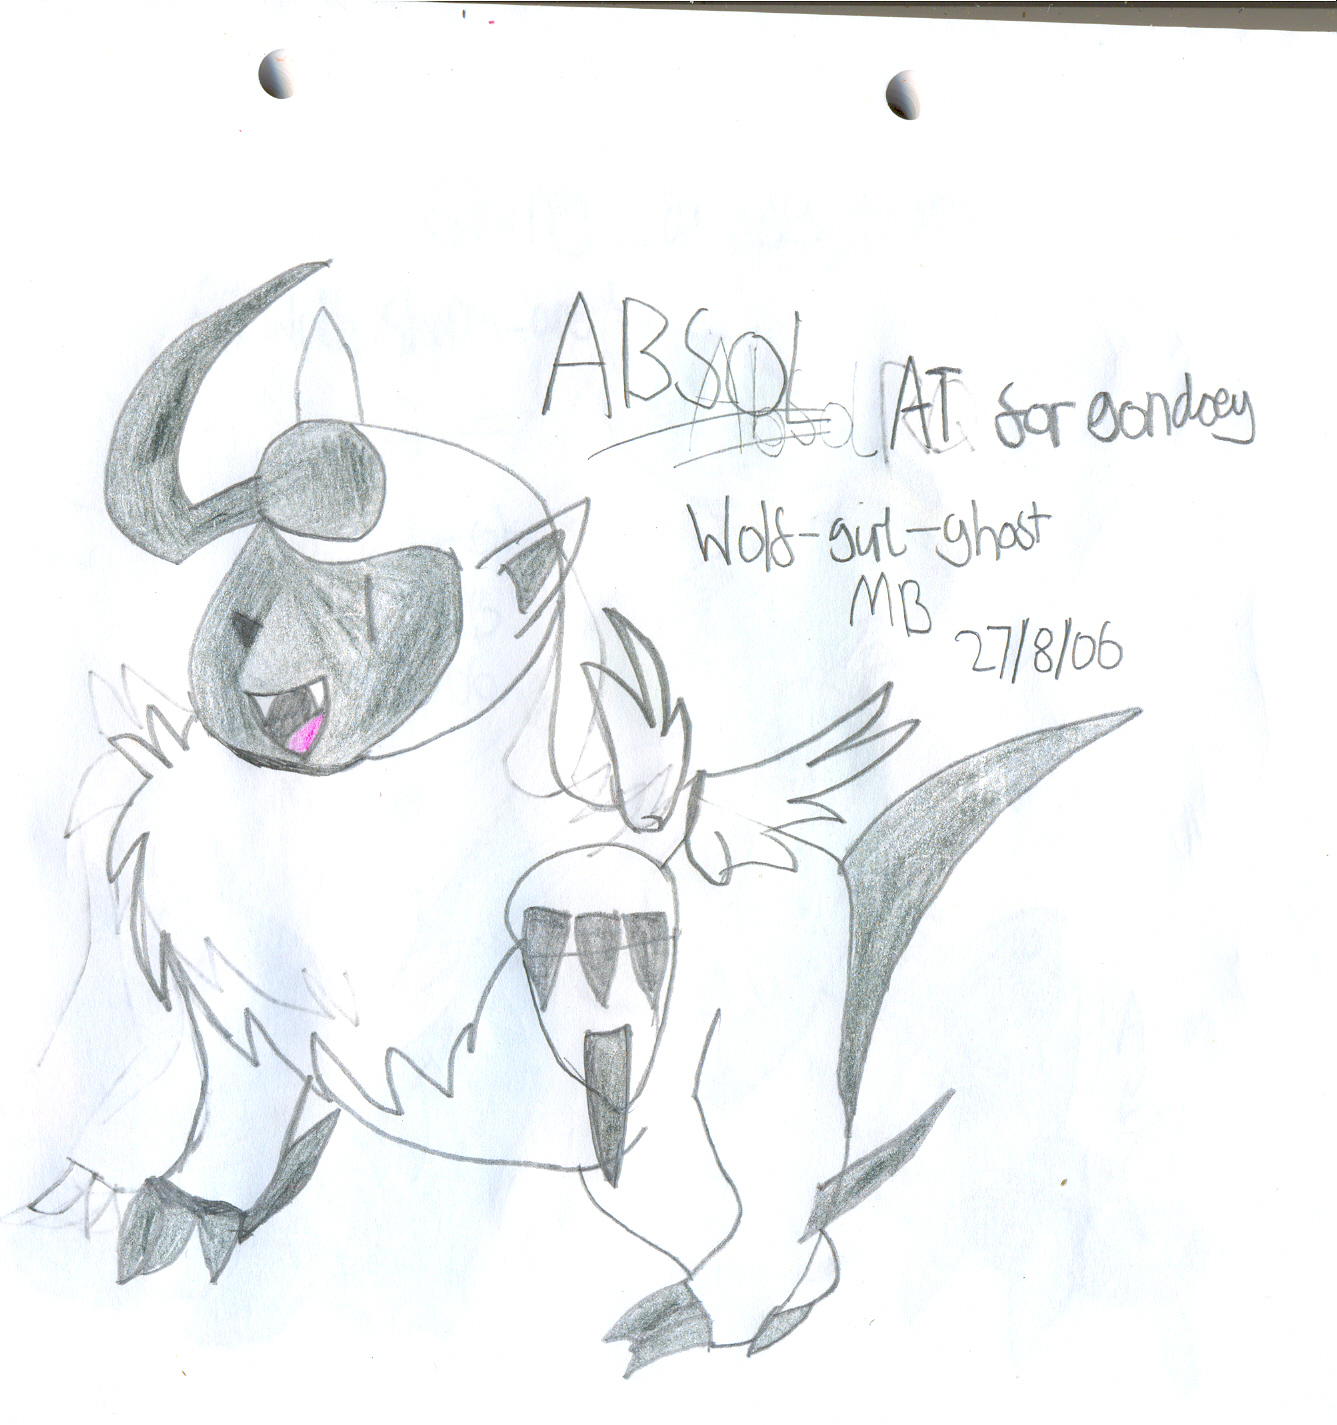 Absol(AT with gondoey) by wolf-girl-ghost